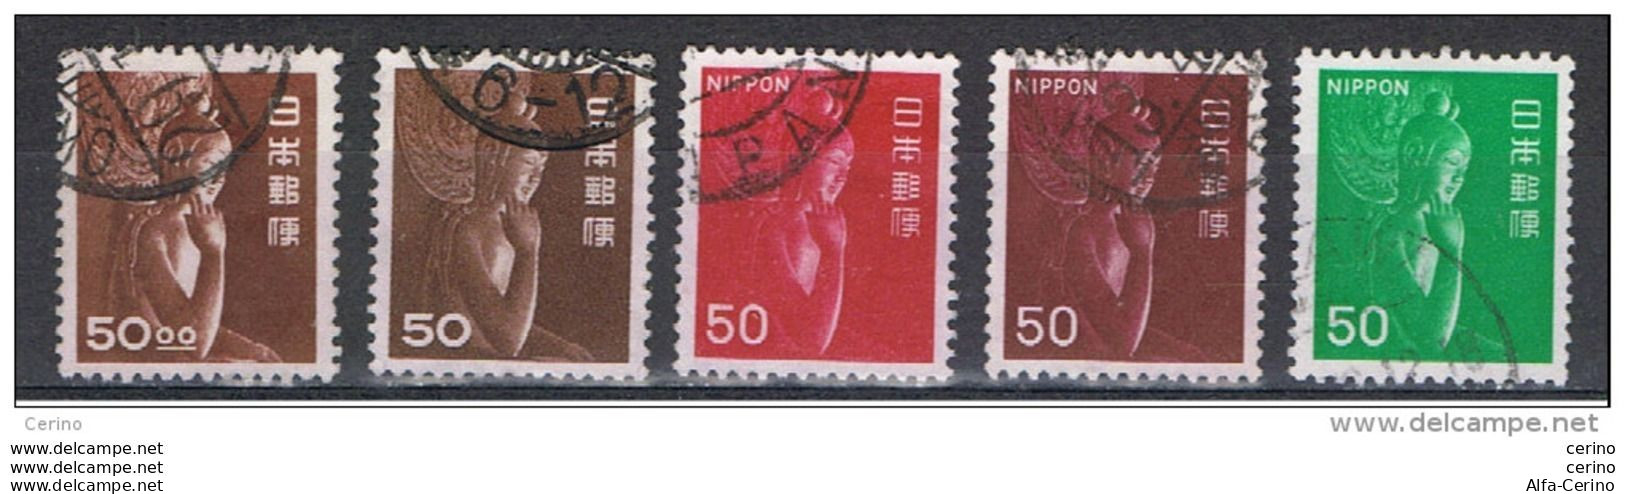 JAPAN:  1951/76  KWANNON  -  KOMPLET  SET  5  USED  STAMPS  -  YV/TELL. 469//1177 - Used Stamps